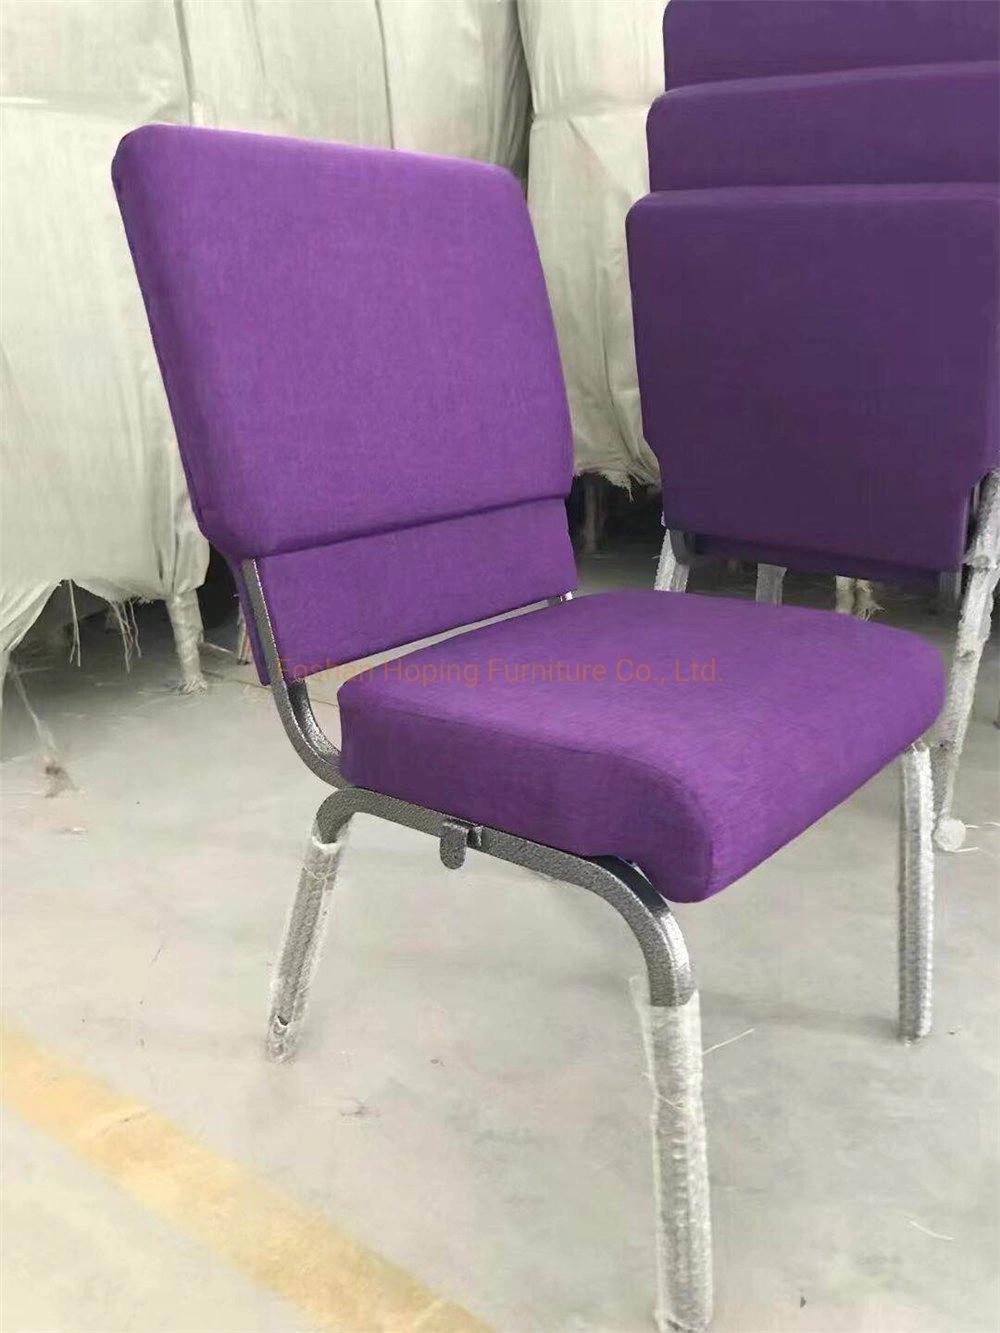 Wholesale Church Chair Saudi Arabia Mosque Prayer Chair for Middle East Market and Home Using Multifunctional High Quality Metal Islam Muslim Prayer Chair